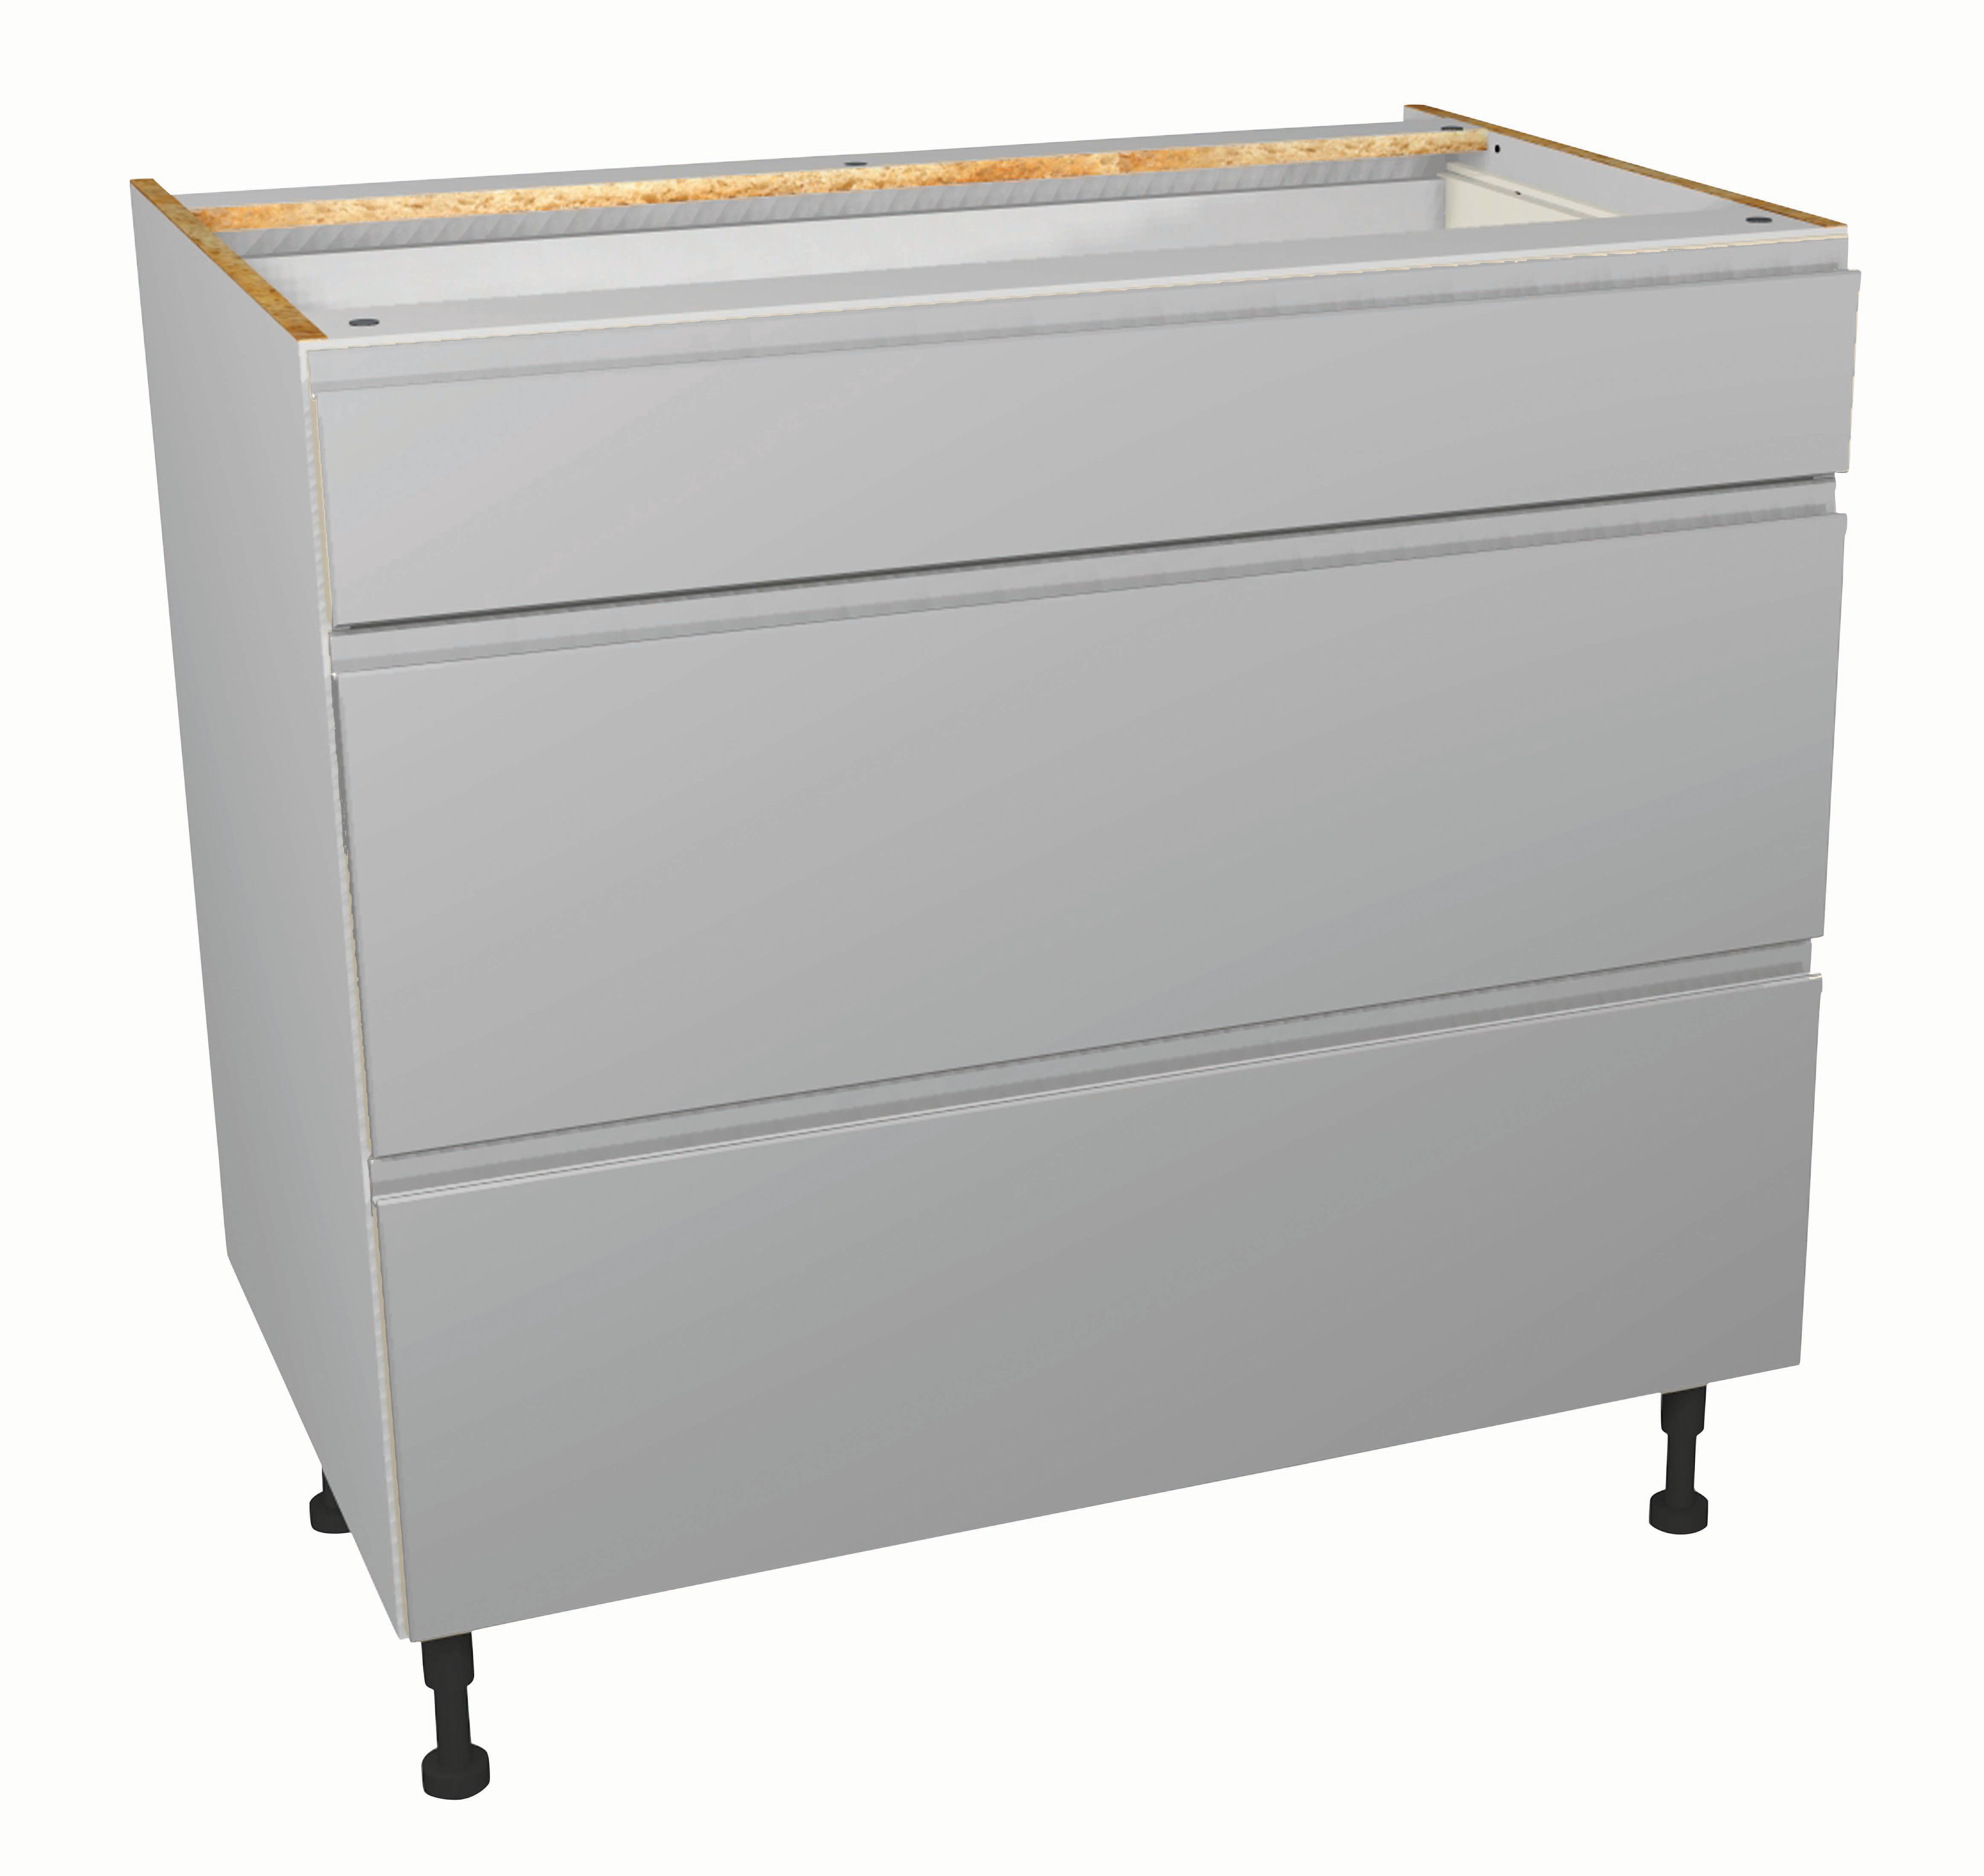 Image of Wickes Madison Grey Gloss Handleless Drawer Unit - 900mm Part 1 of 2